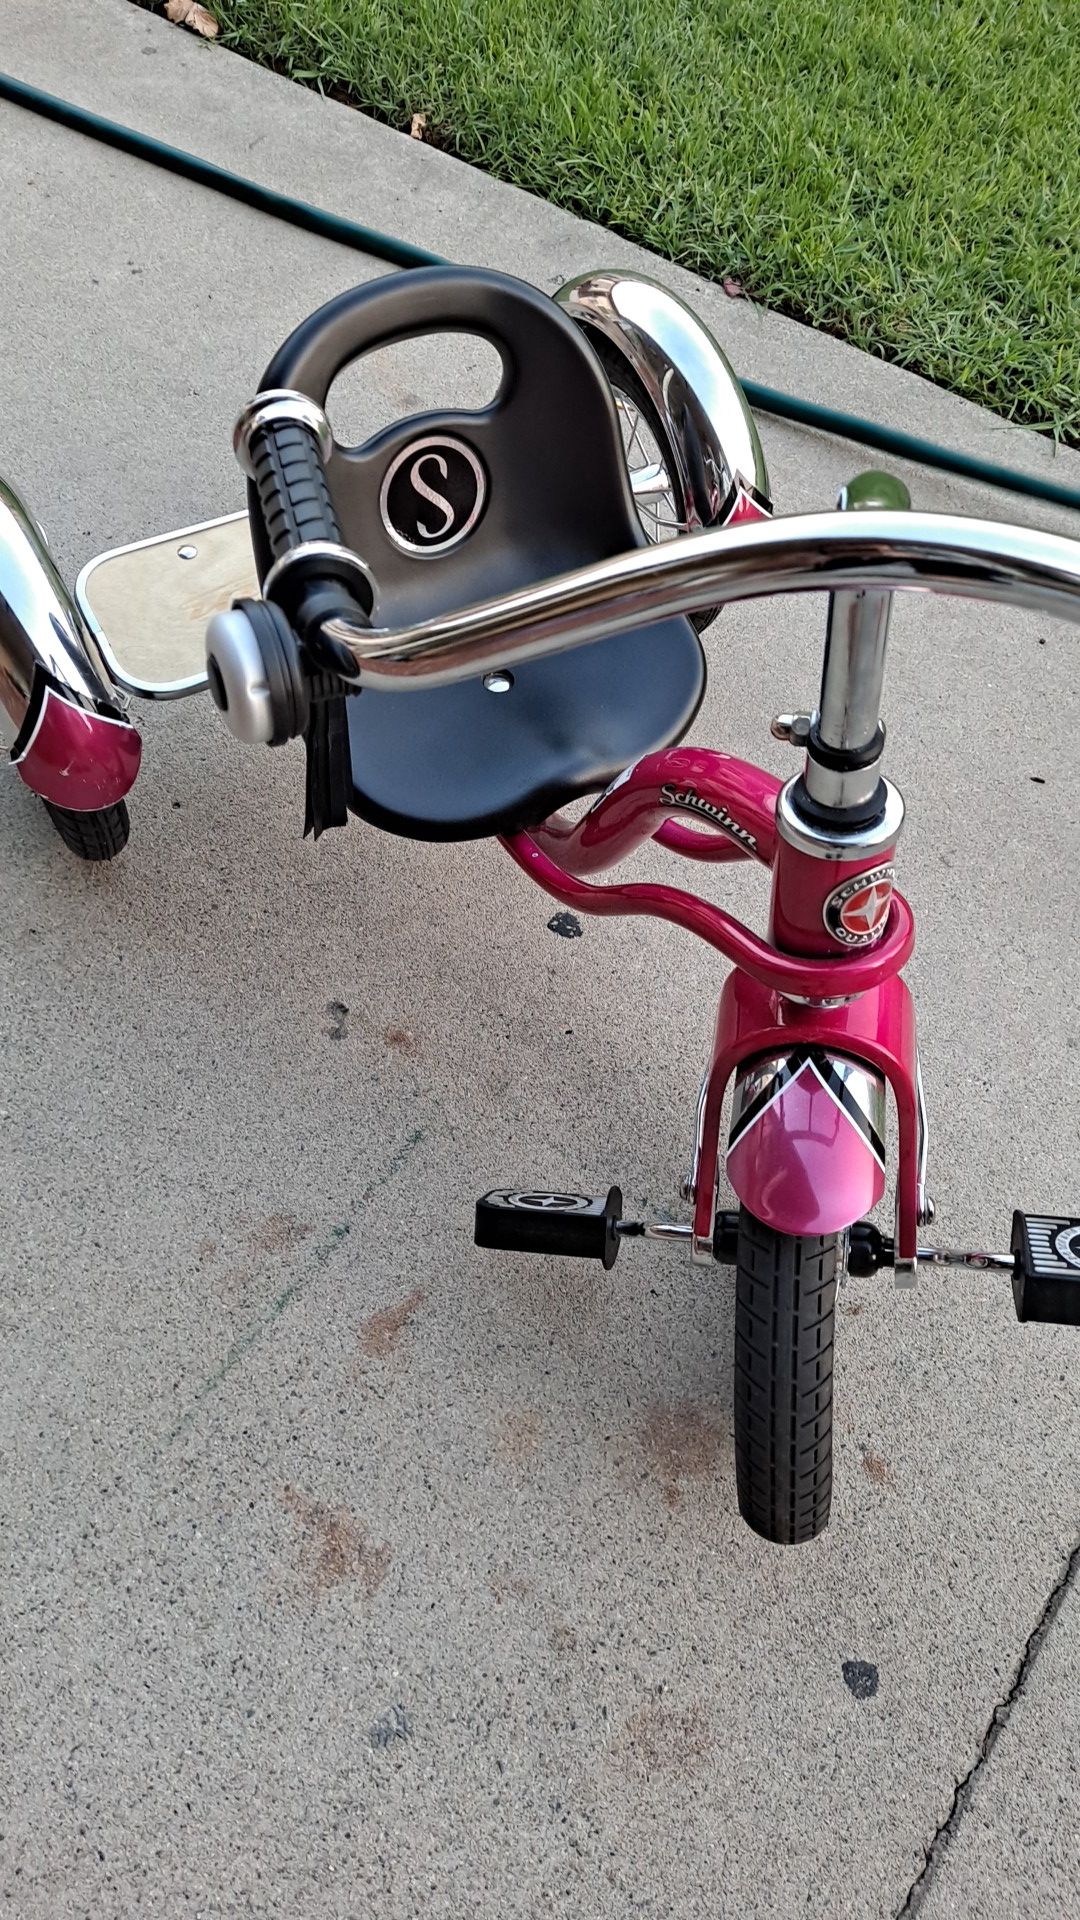 New used Schwimmer Beach cruiser. My daughter grew out of it